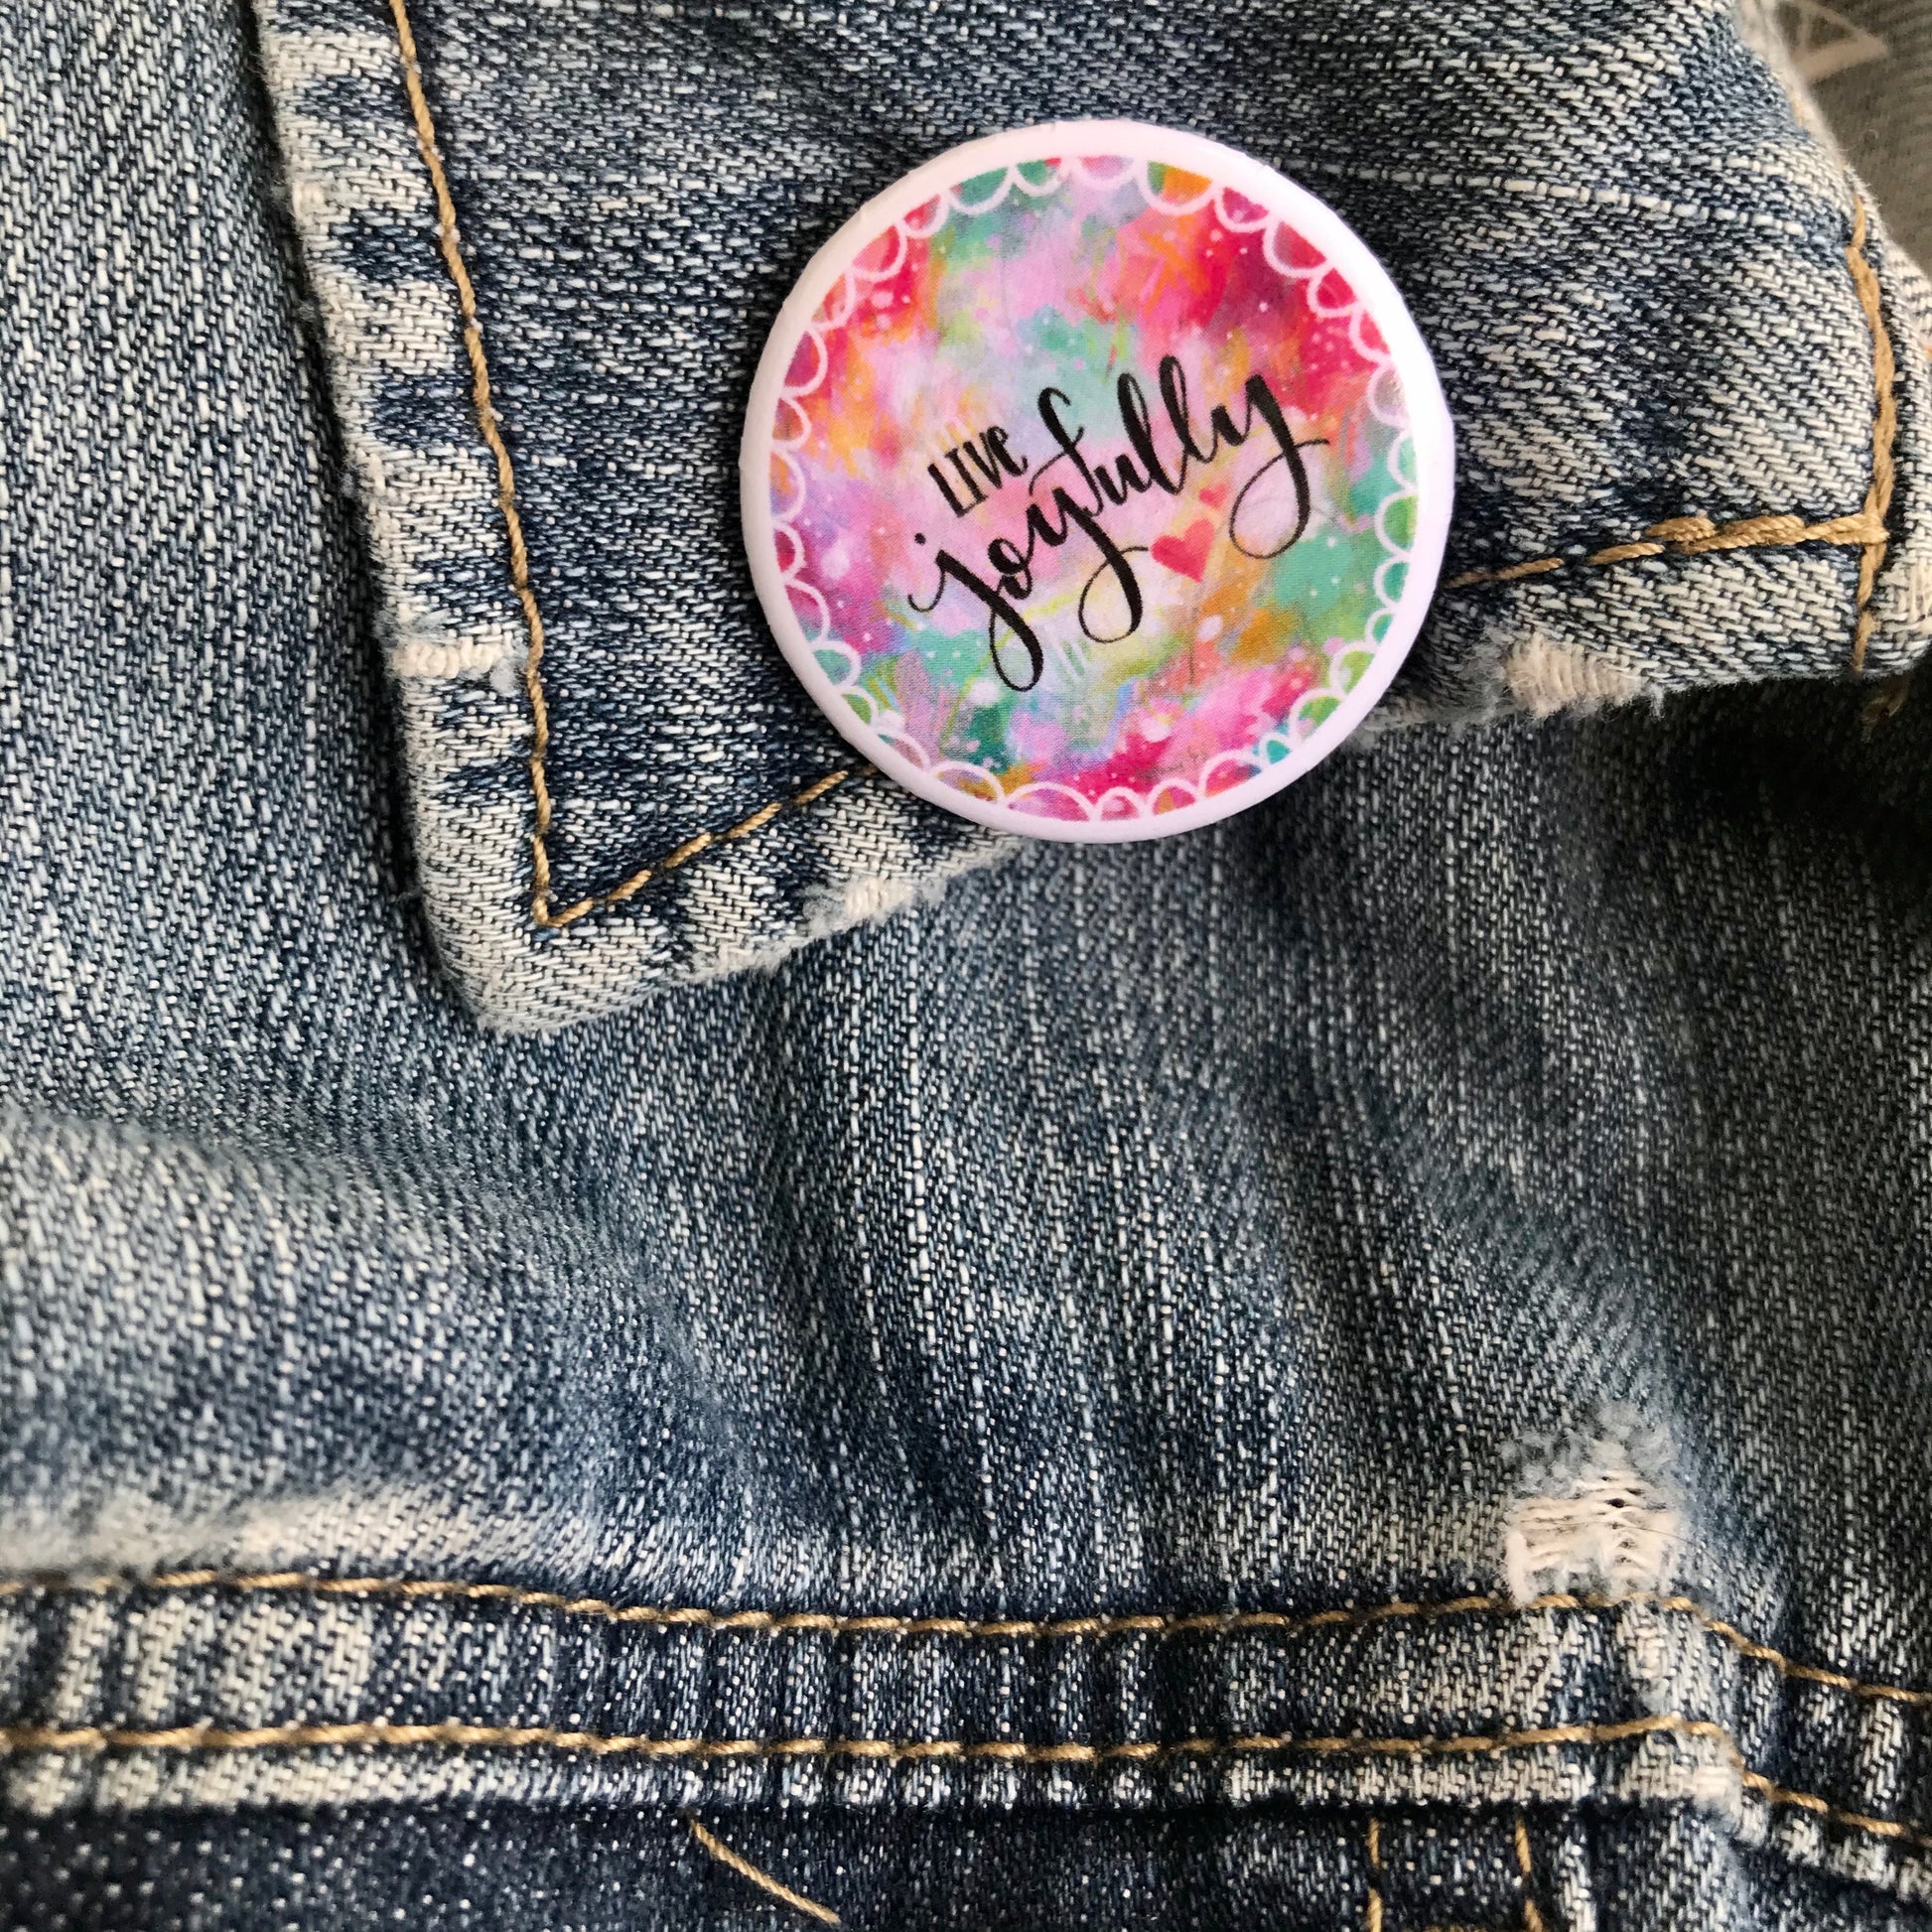 Live Joyfully Buttons/Pins Pack of 2 or 4 - Bethany Joy Art